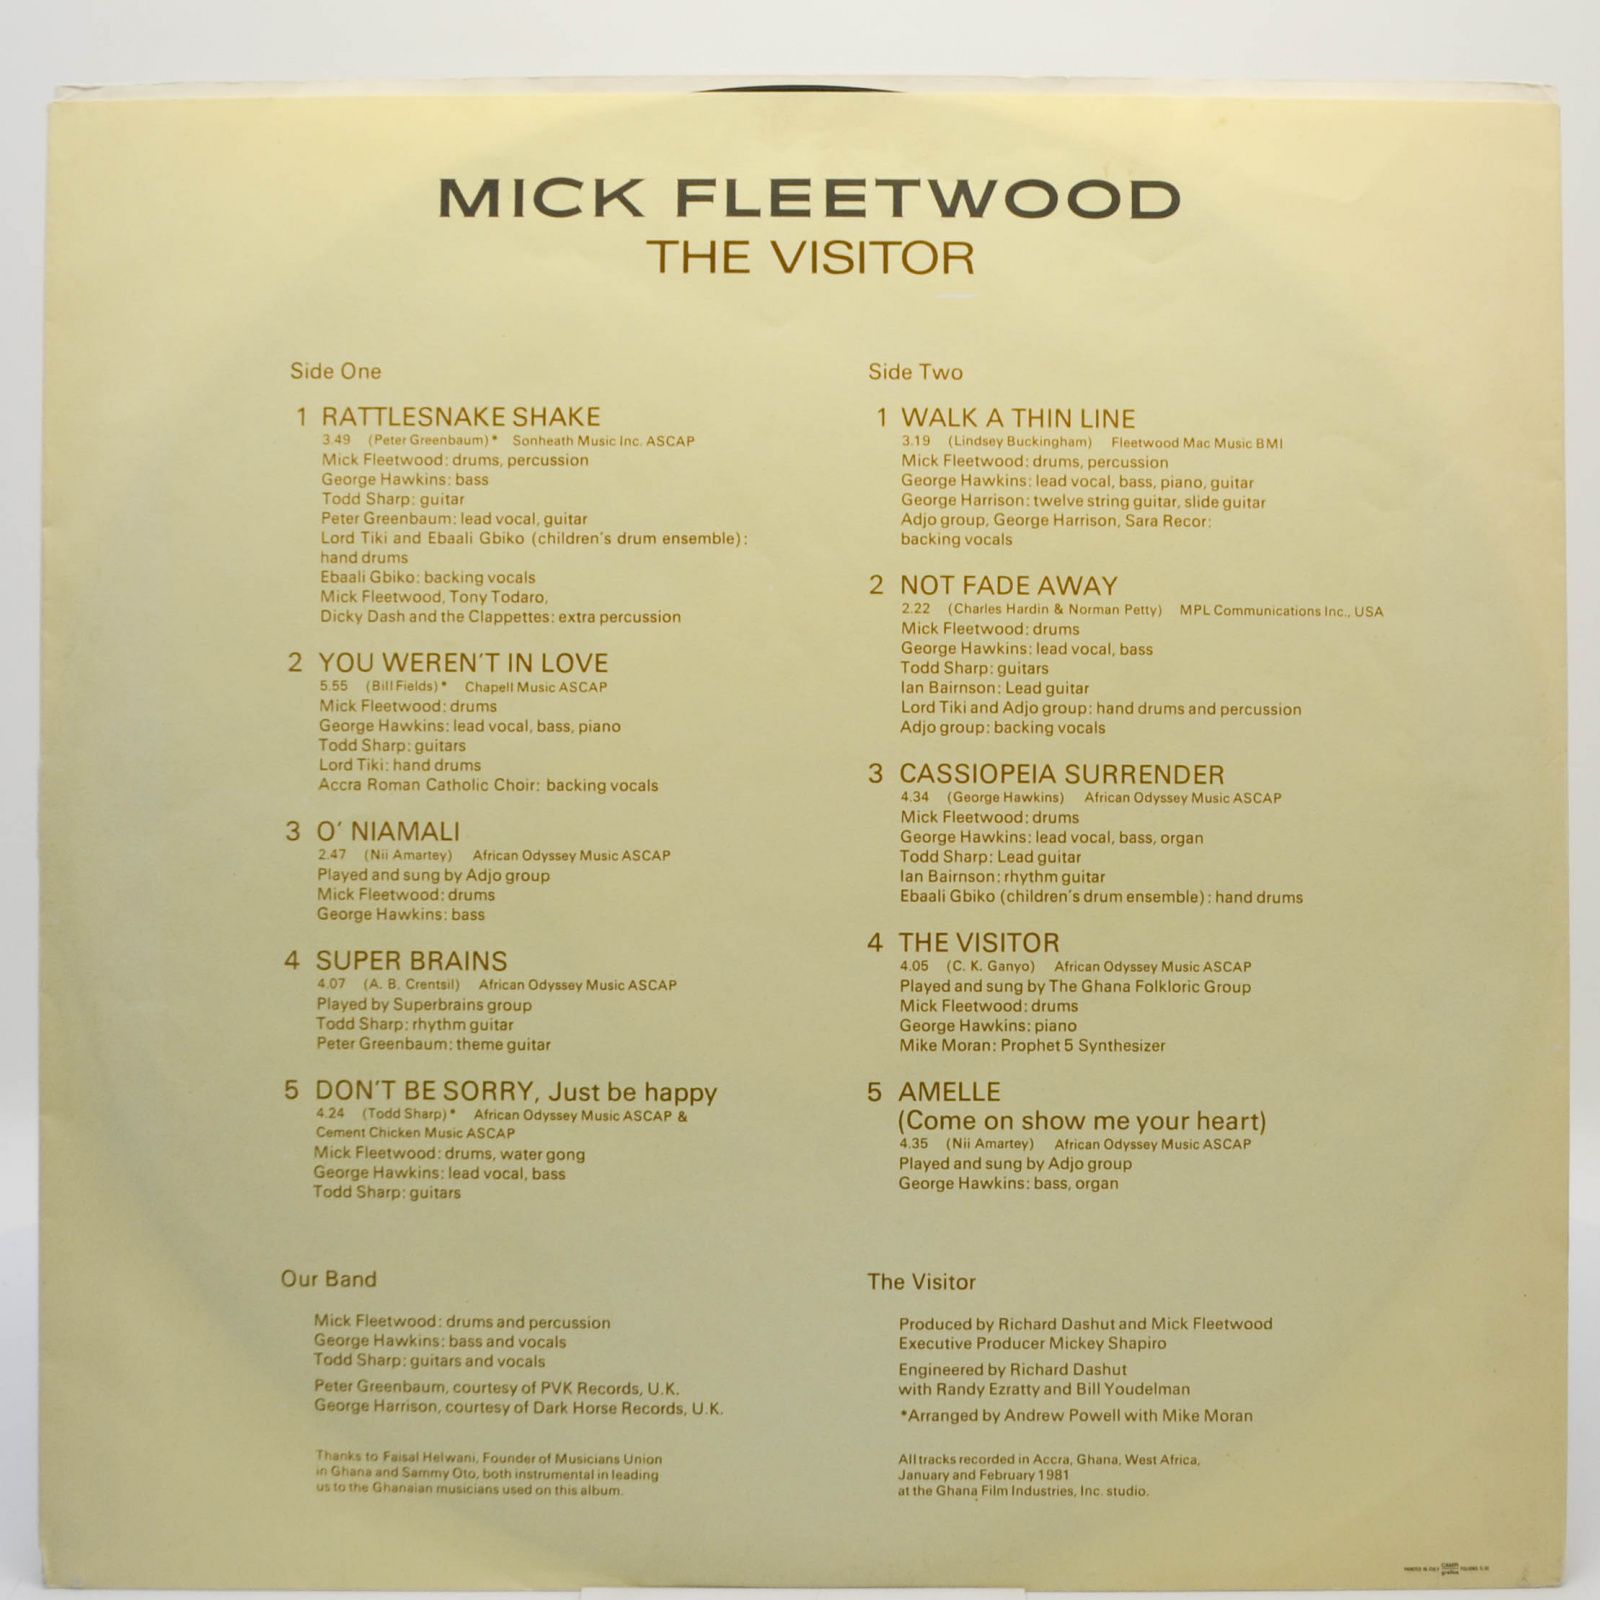 Mick Fleetwood — The Visitor, 1981